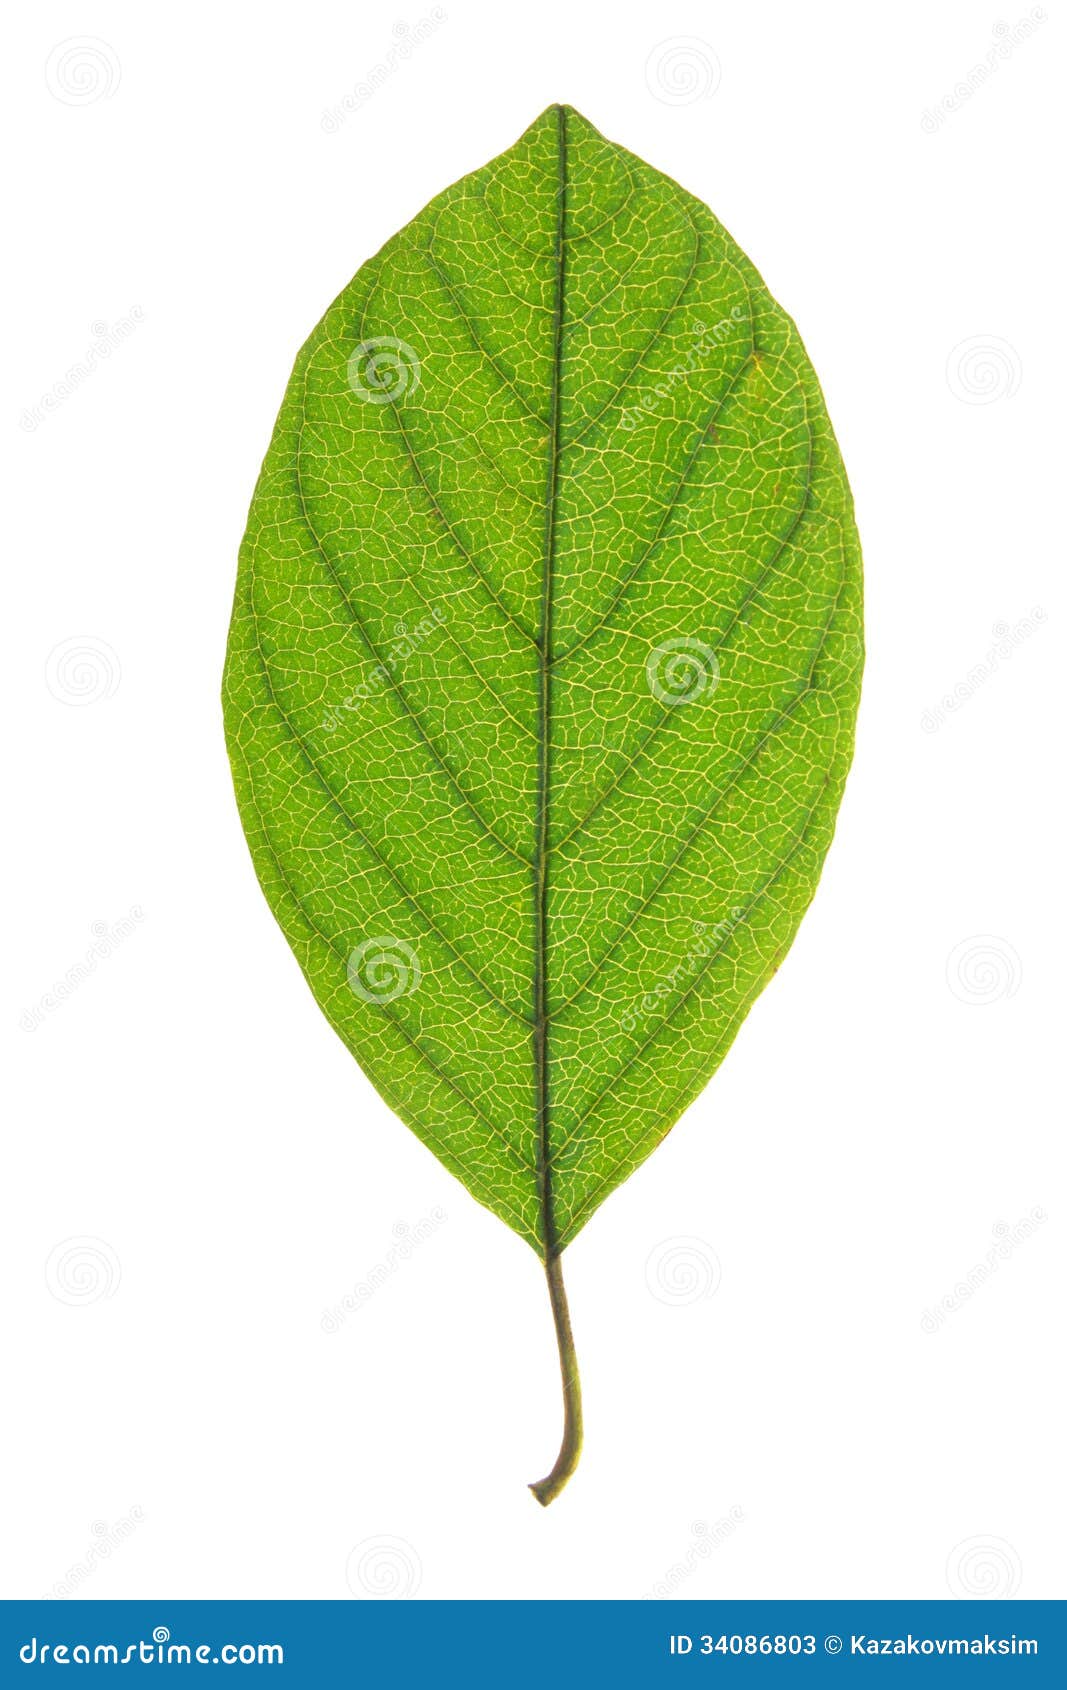 Leaf of Alder Buckthorn Isolated on White Stock Image - Image of ...